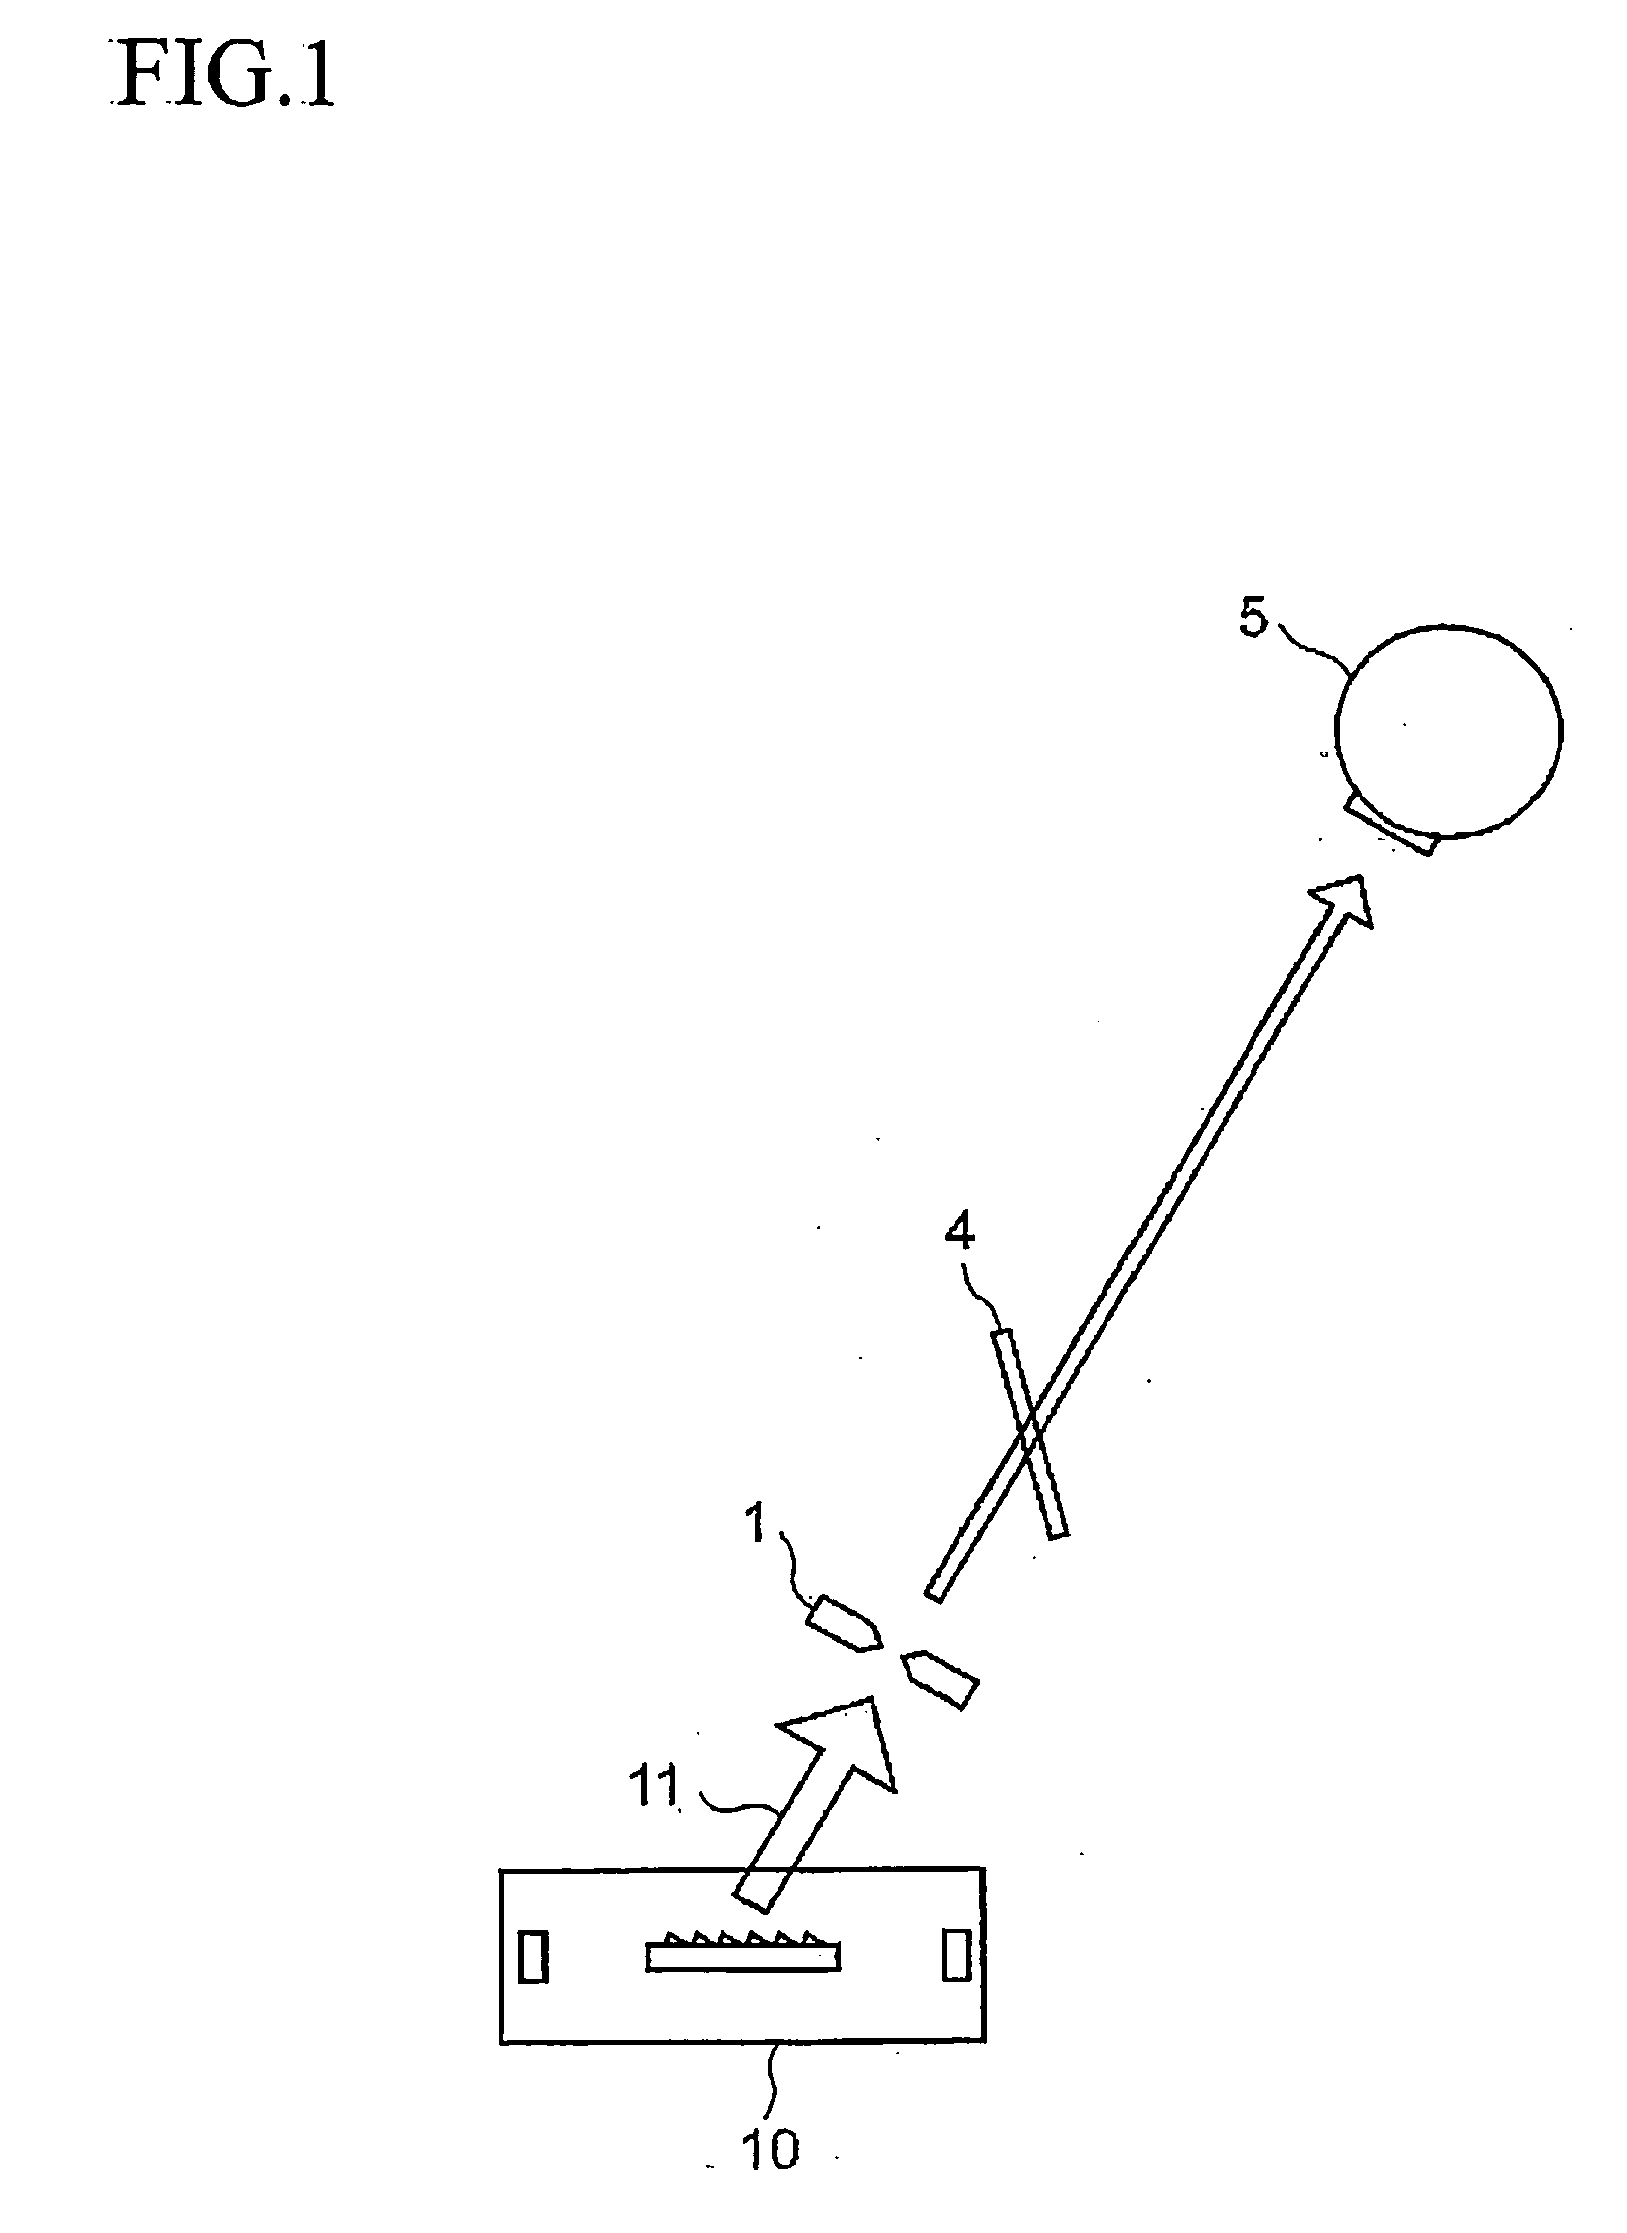 Tera-hertz wave transmitting optical component, tera-hertz wave optical system, tera-hertz band wave processing device and method